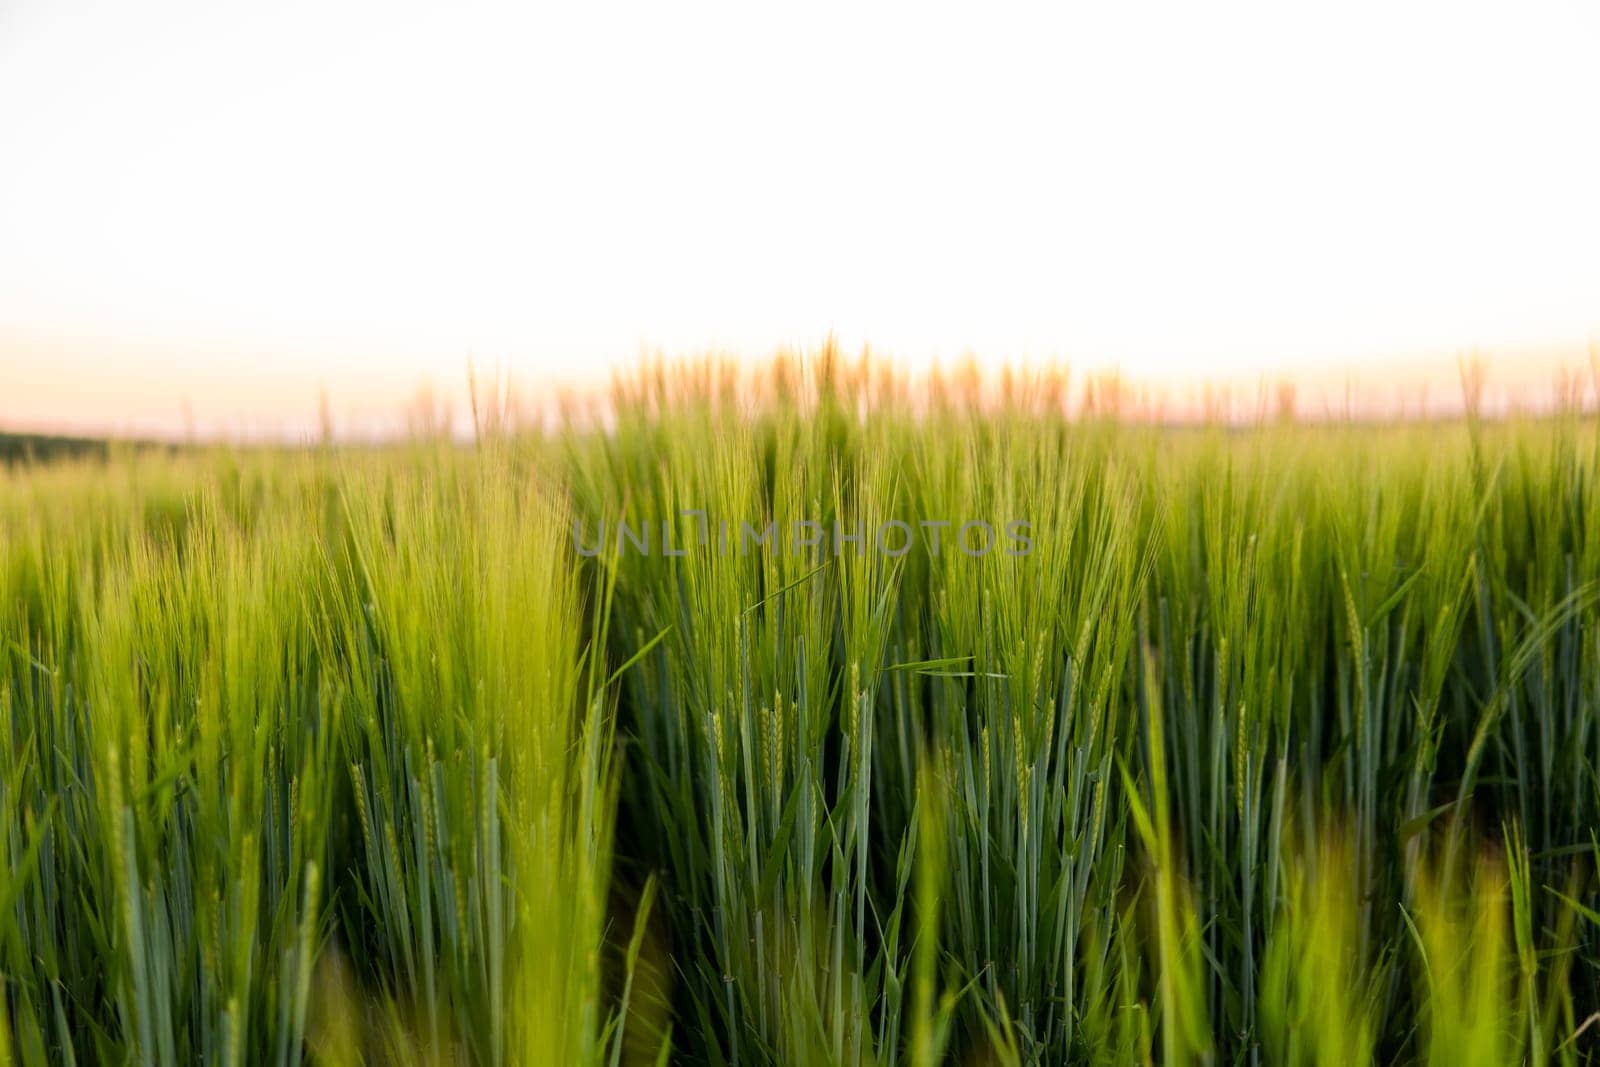 Green barley field under sunlight in summer. Agriculture. Cereals growing in a fertile soil